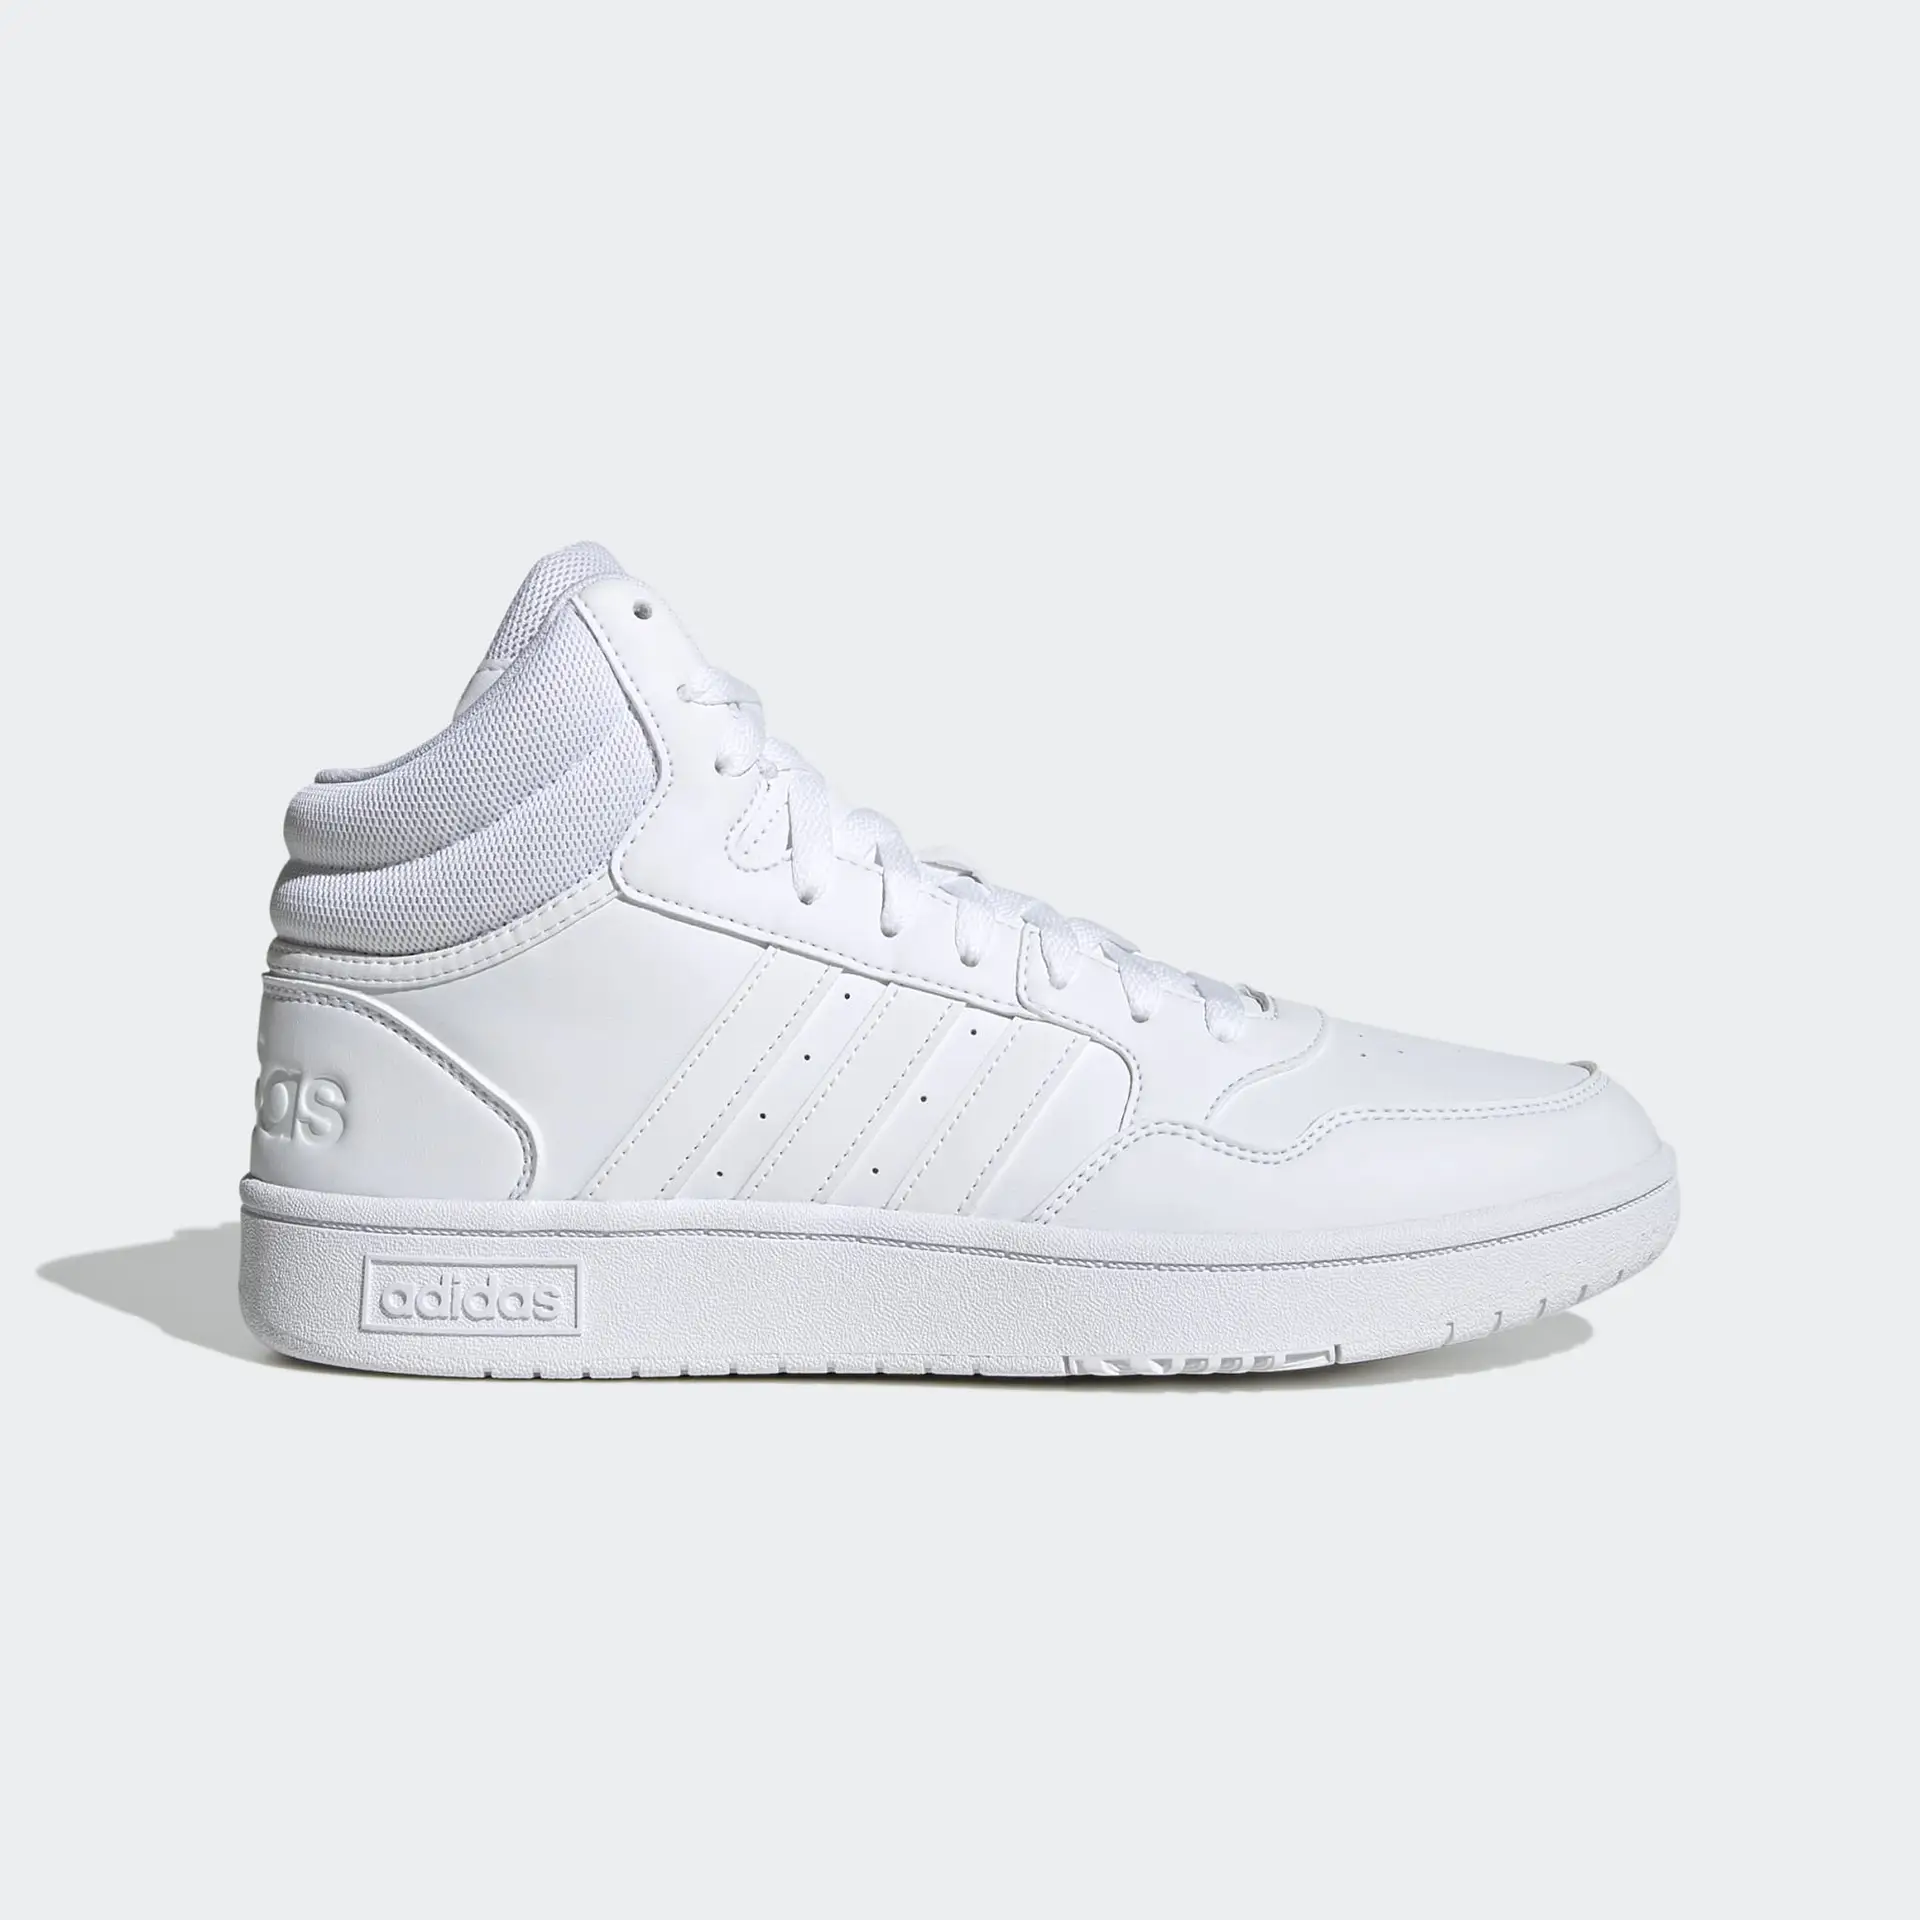 adidas Hoops 3.0 Mid Sneakers White/White